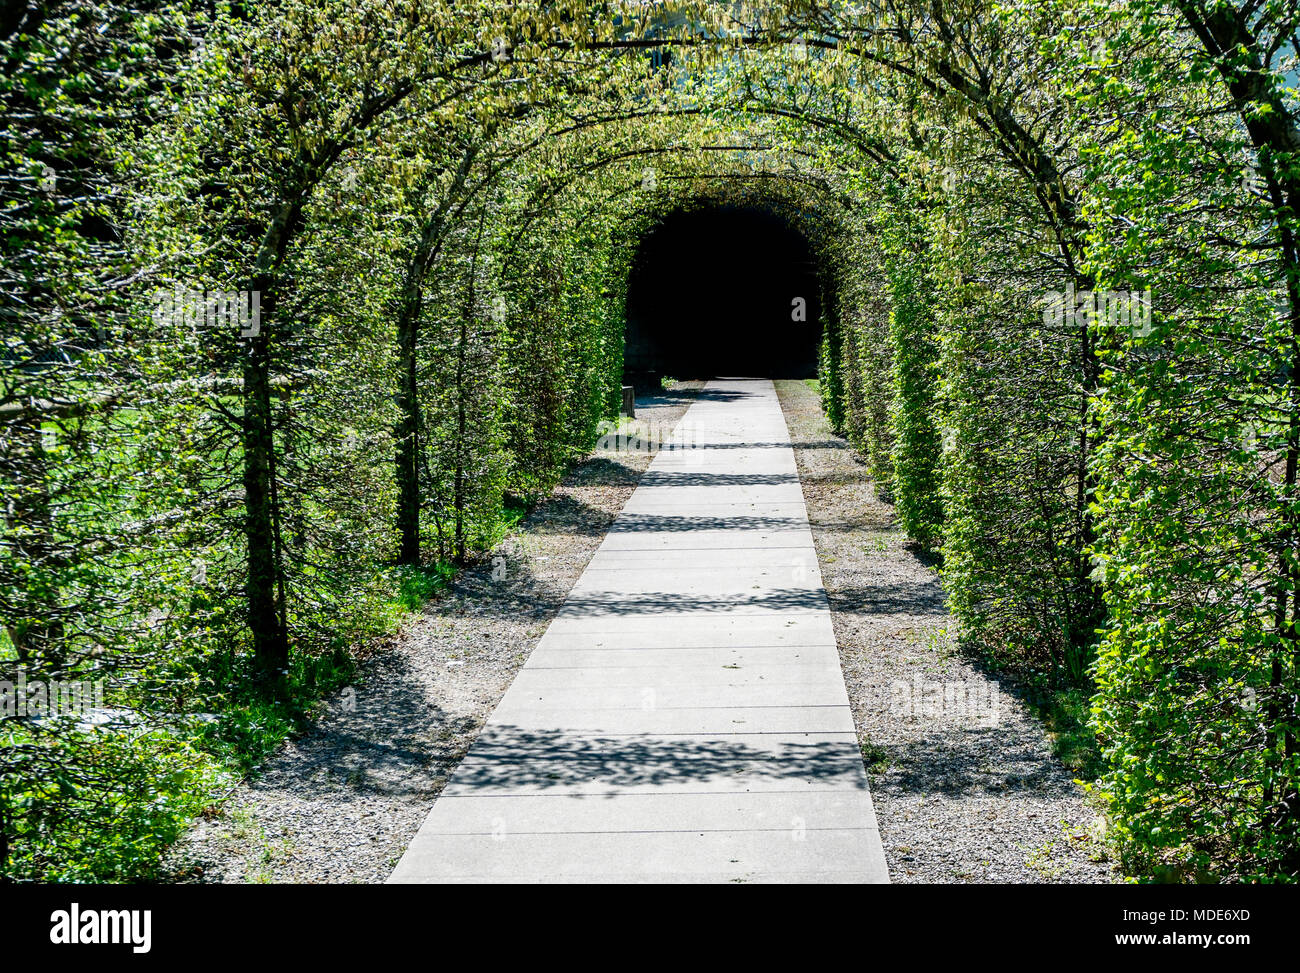 Lush Green Archway Of Trees Leading To A Dark Exit Stock Photo Alamy